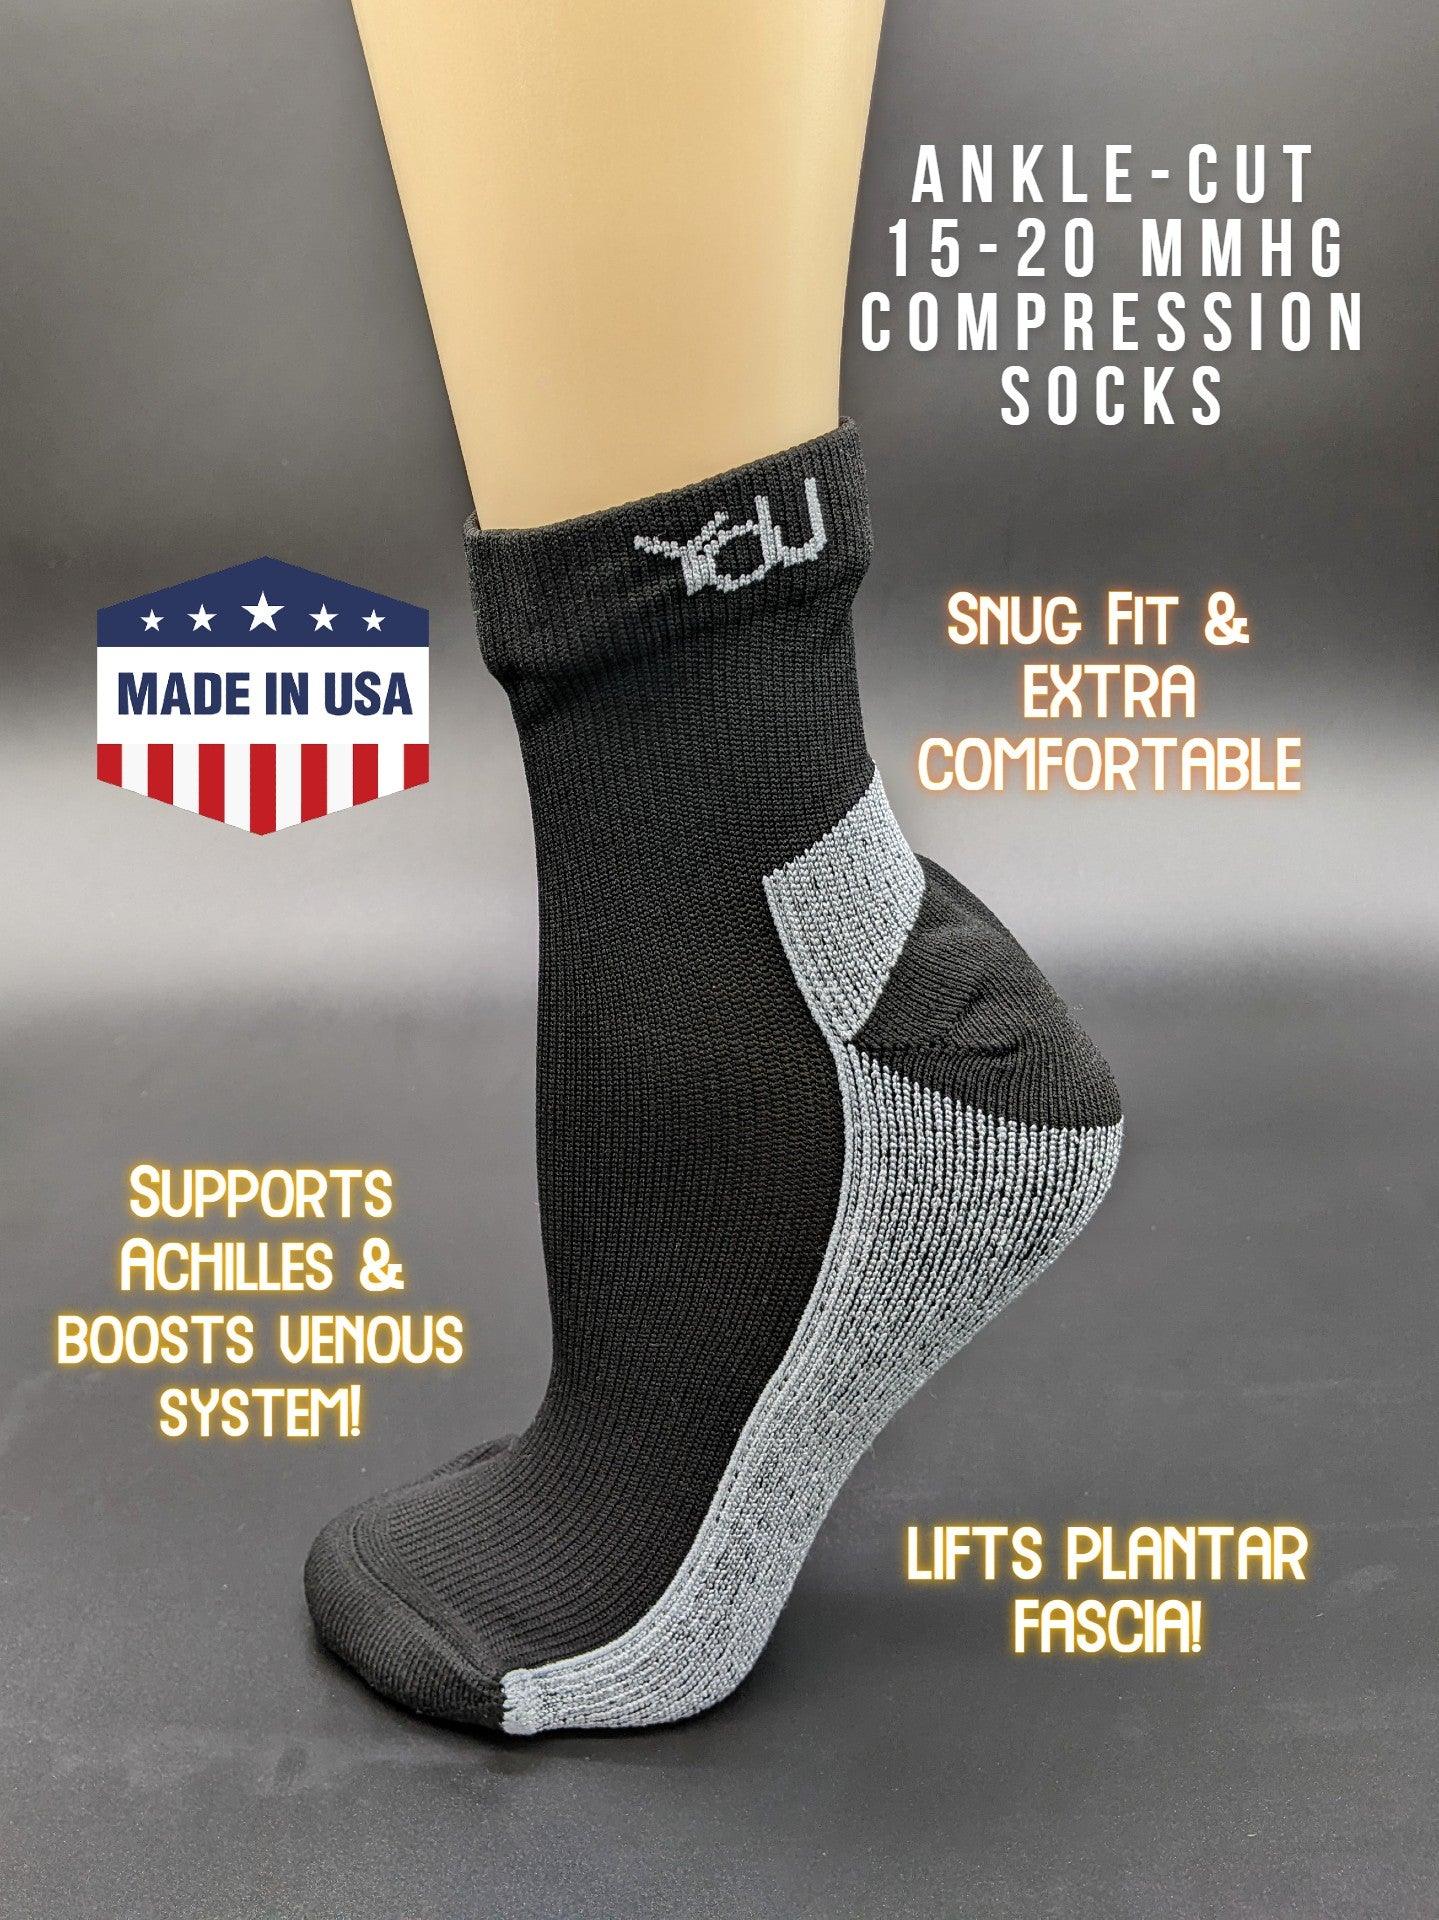 ALL DAY COMFORTABLE CALF SUPPORT SEAMLESS CALF COMPRESSION SLEEVES